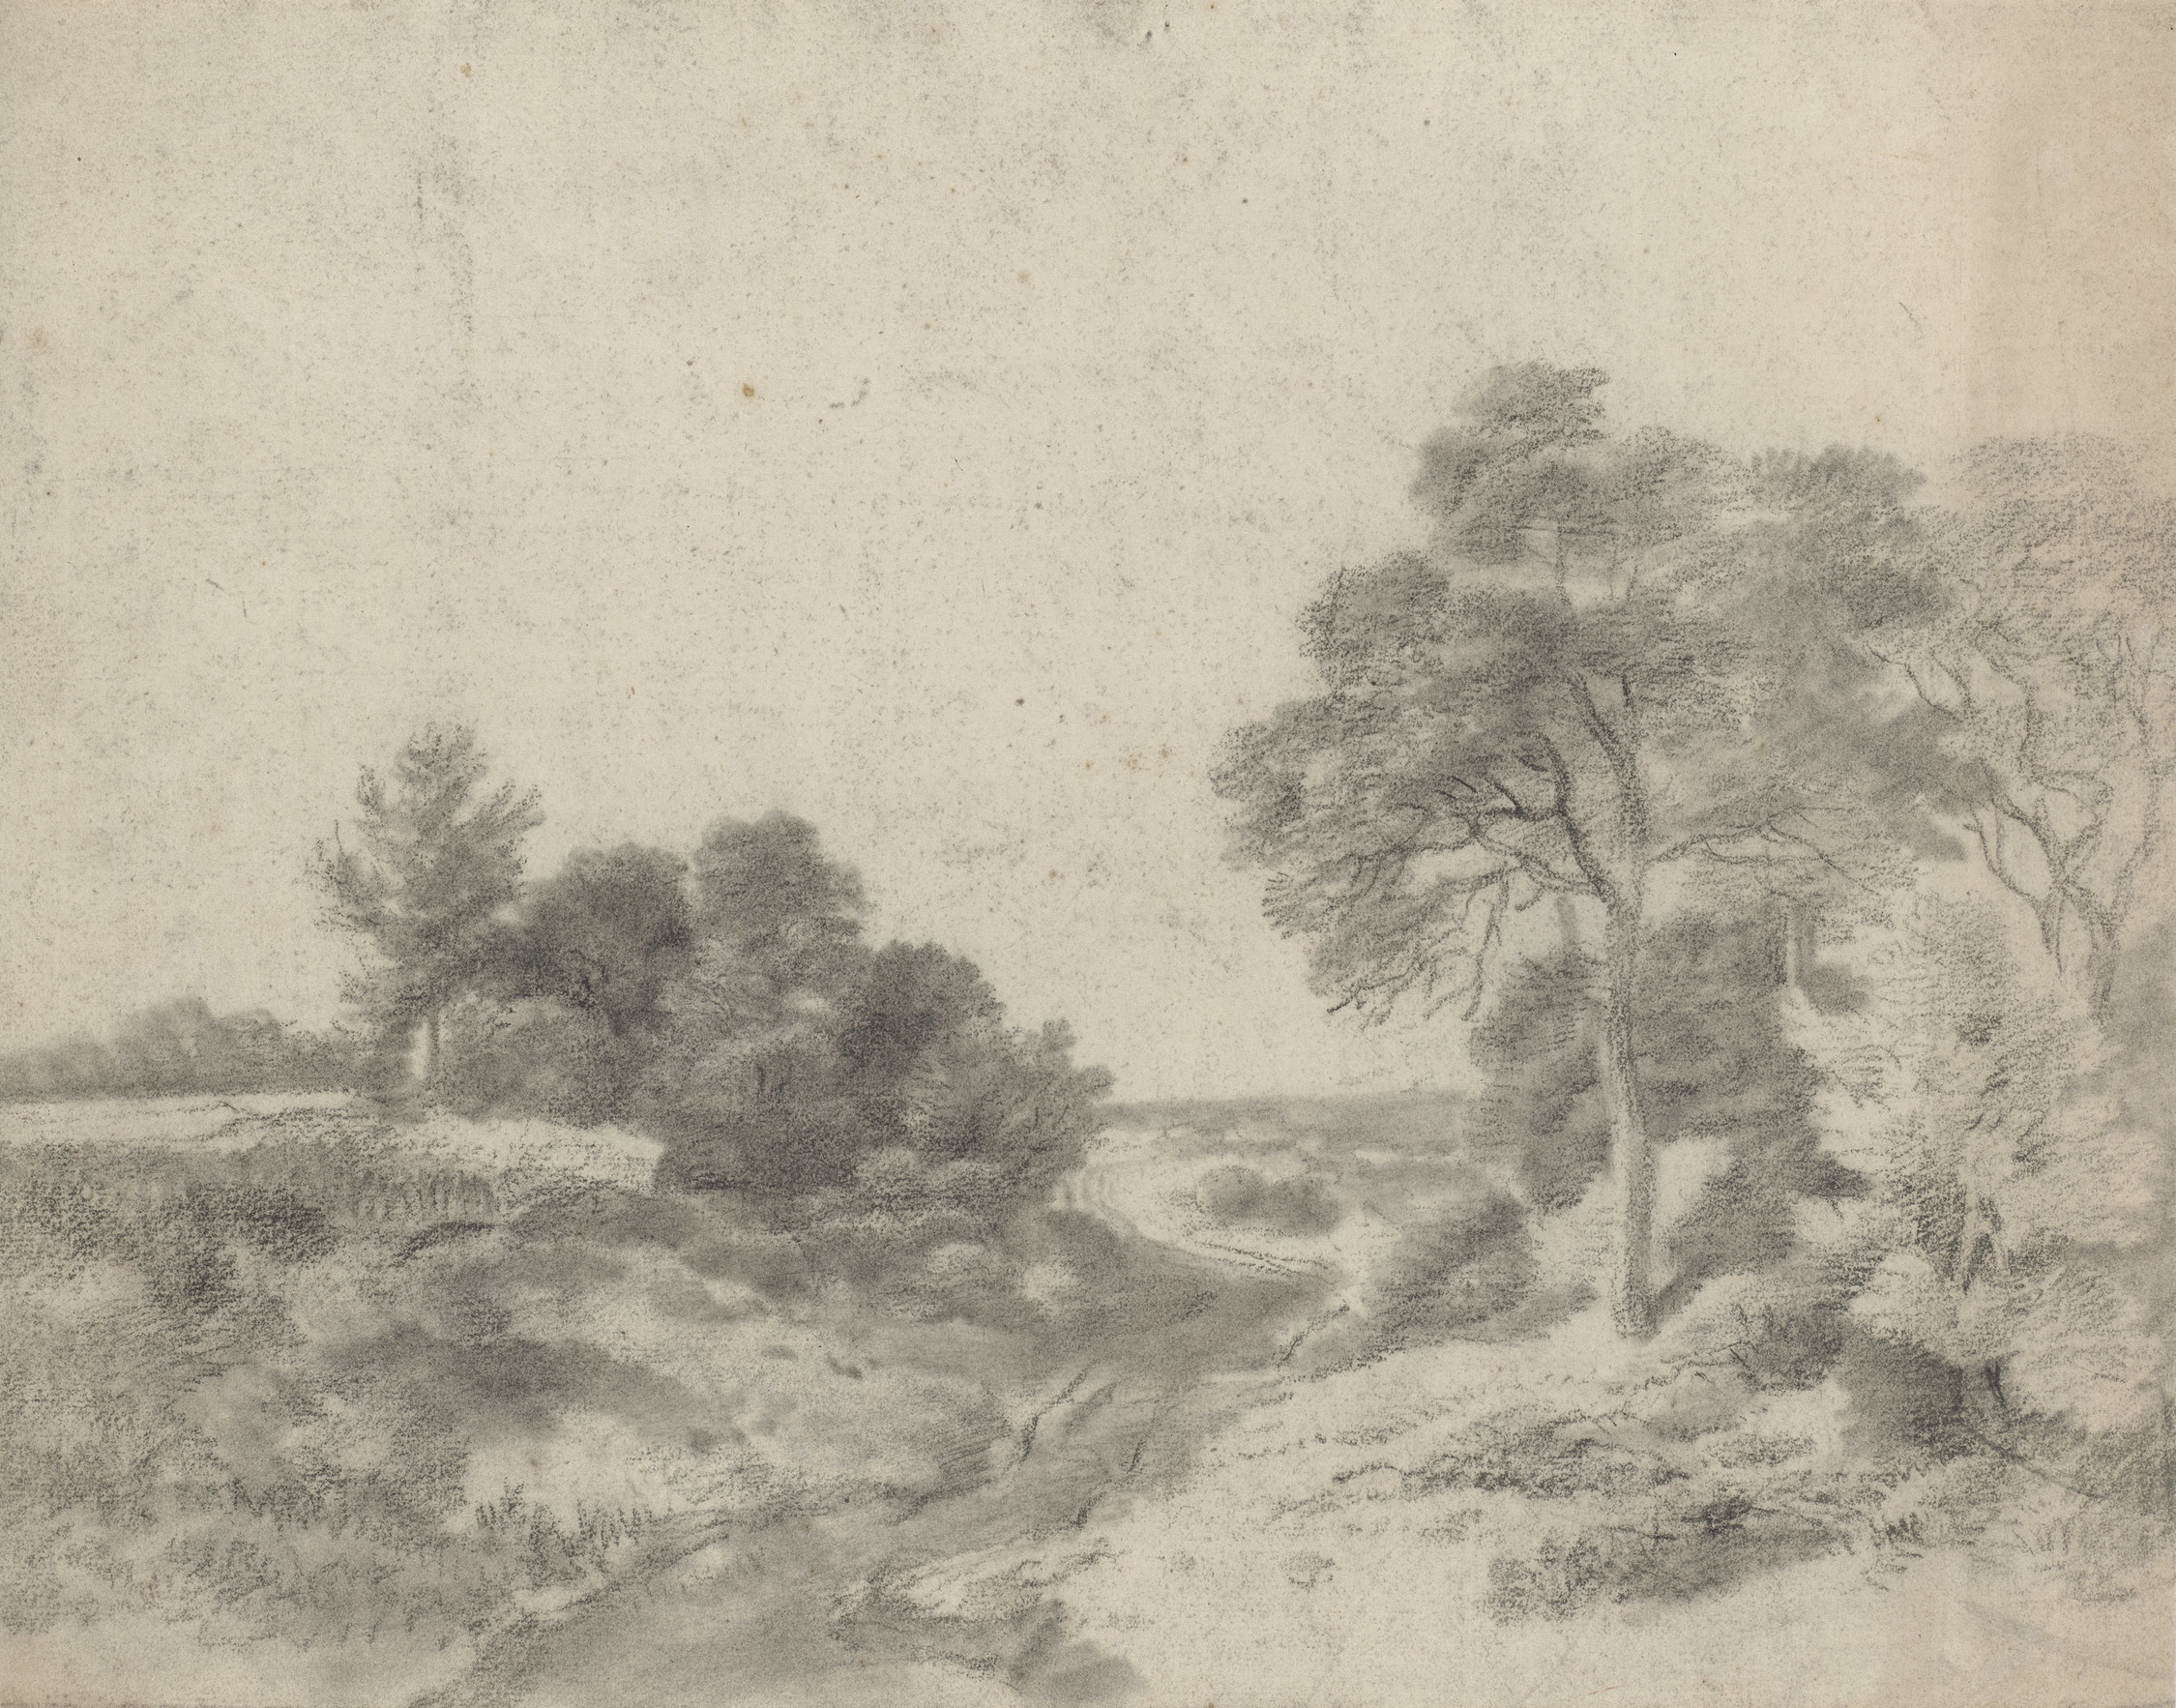 A&nbsp;drawing in black&nbsp;chalk and stump&nbsp;showing trees and a path winding into the distance. On the verso, a drawing of trees, softened with stump. This drawing bears strong similarities to other landscape drawings by Gainsborough from the 1740s